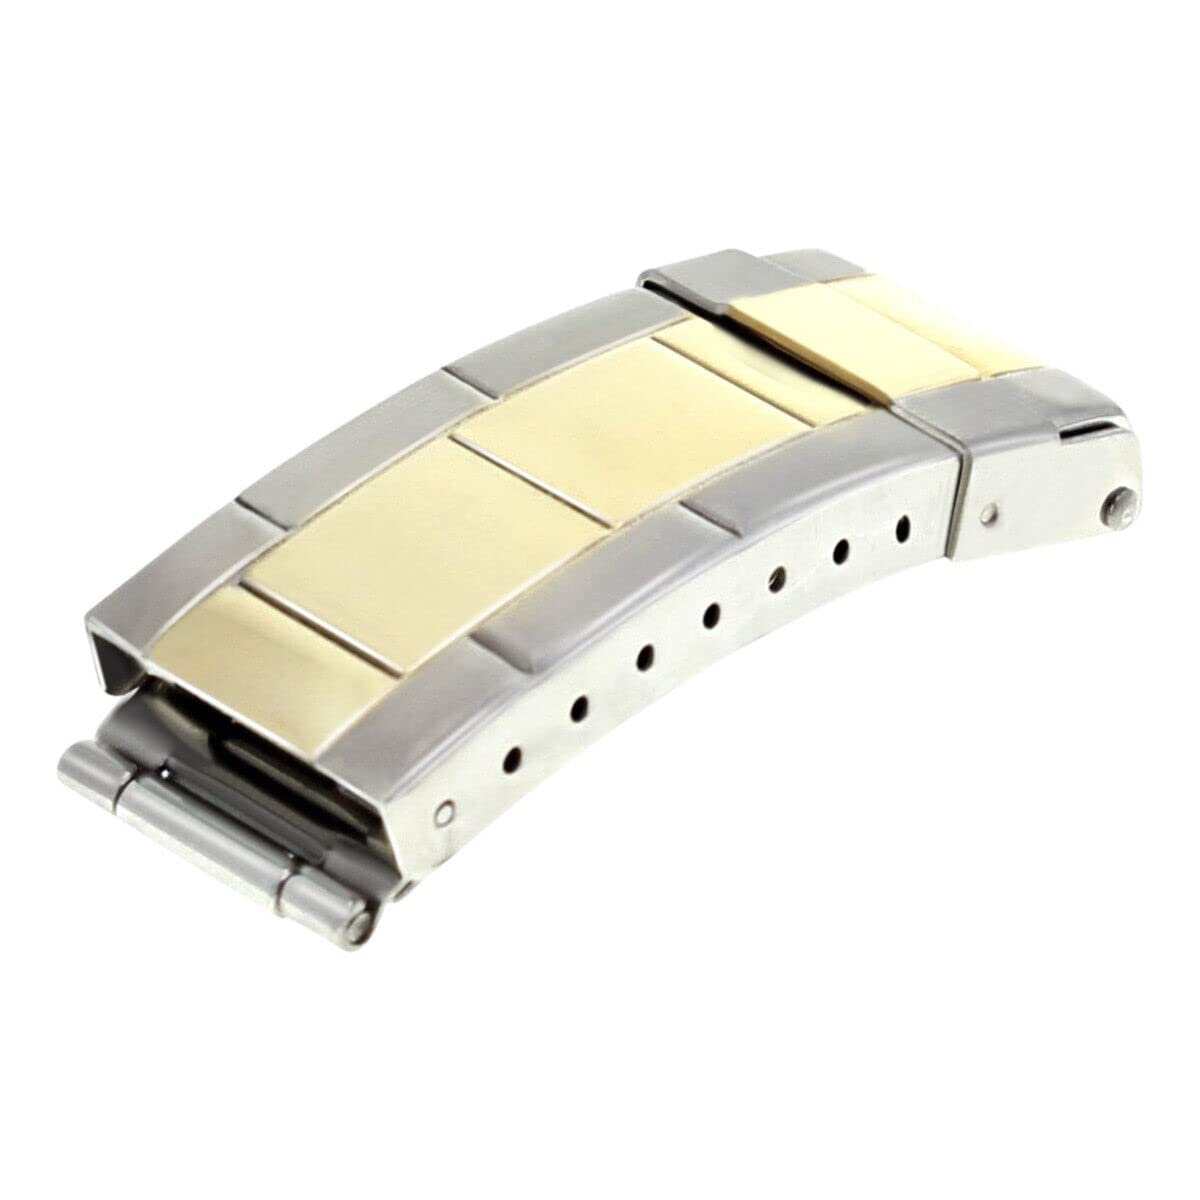 Ewatchparts FLIP LOCK BUCKLE CLASP DIVER EXTENSION FOR ROLEX GMT OYSTER WATCH BAND TWO TONE